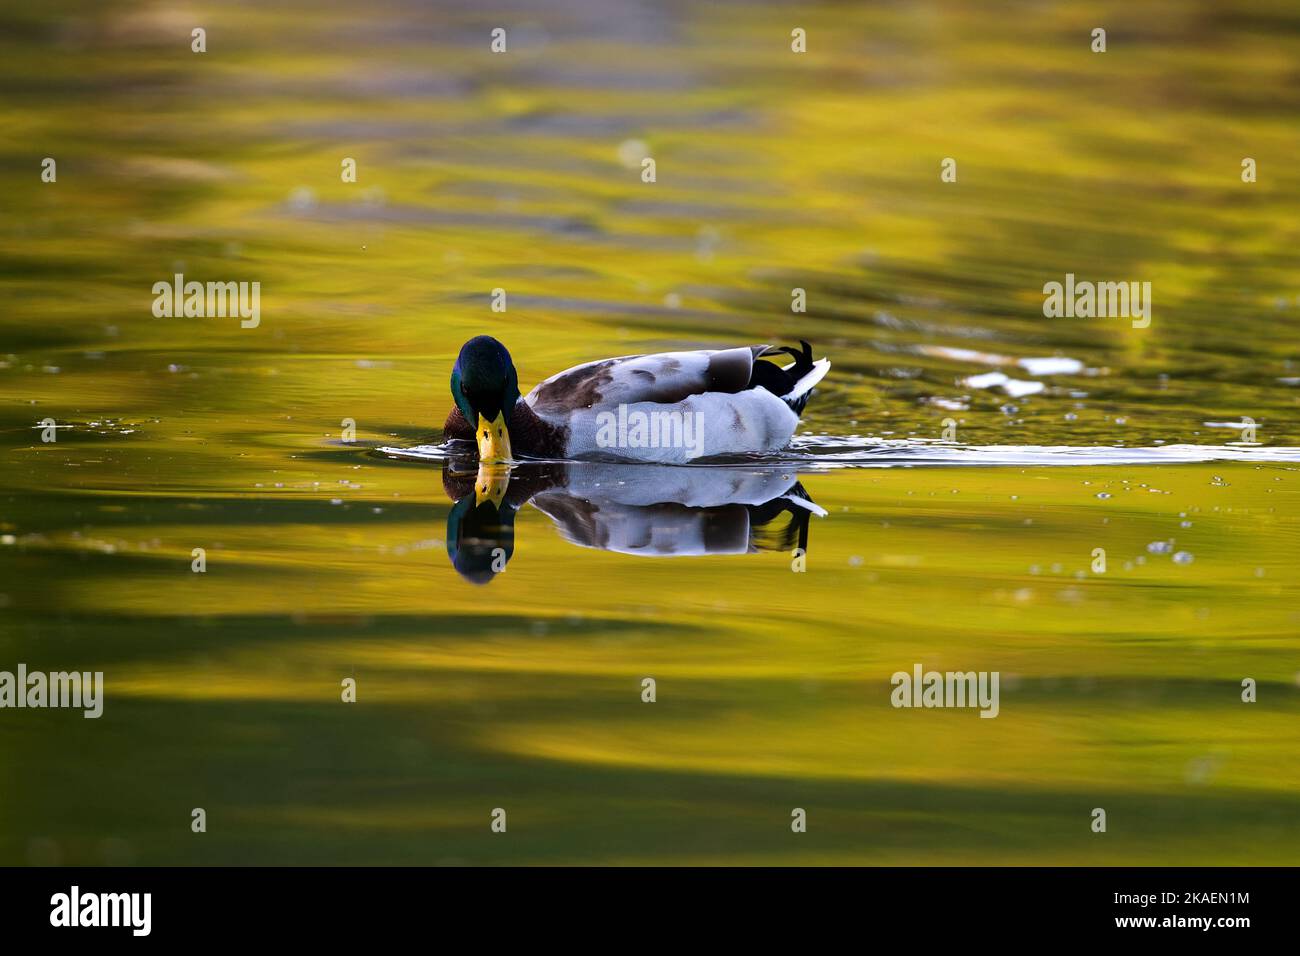 A closeup of a duck on water surface Stock Photo